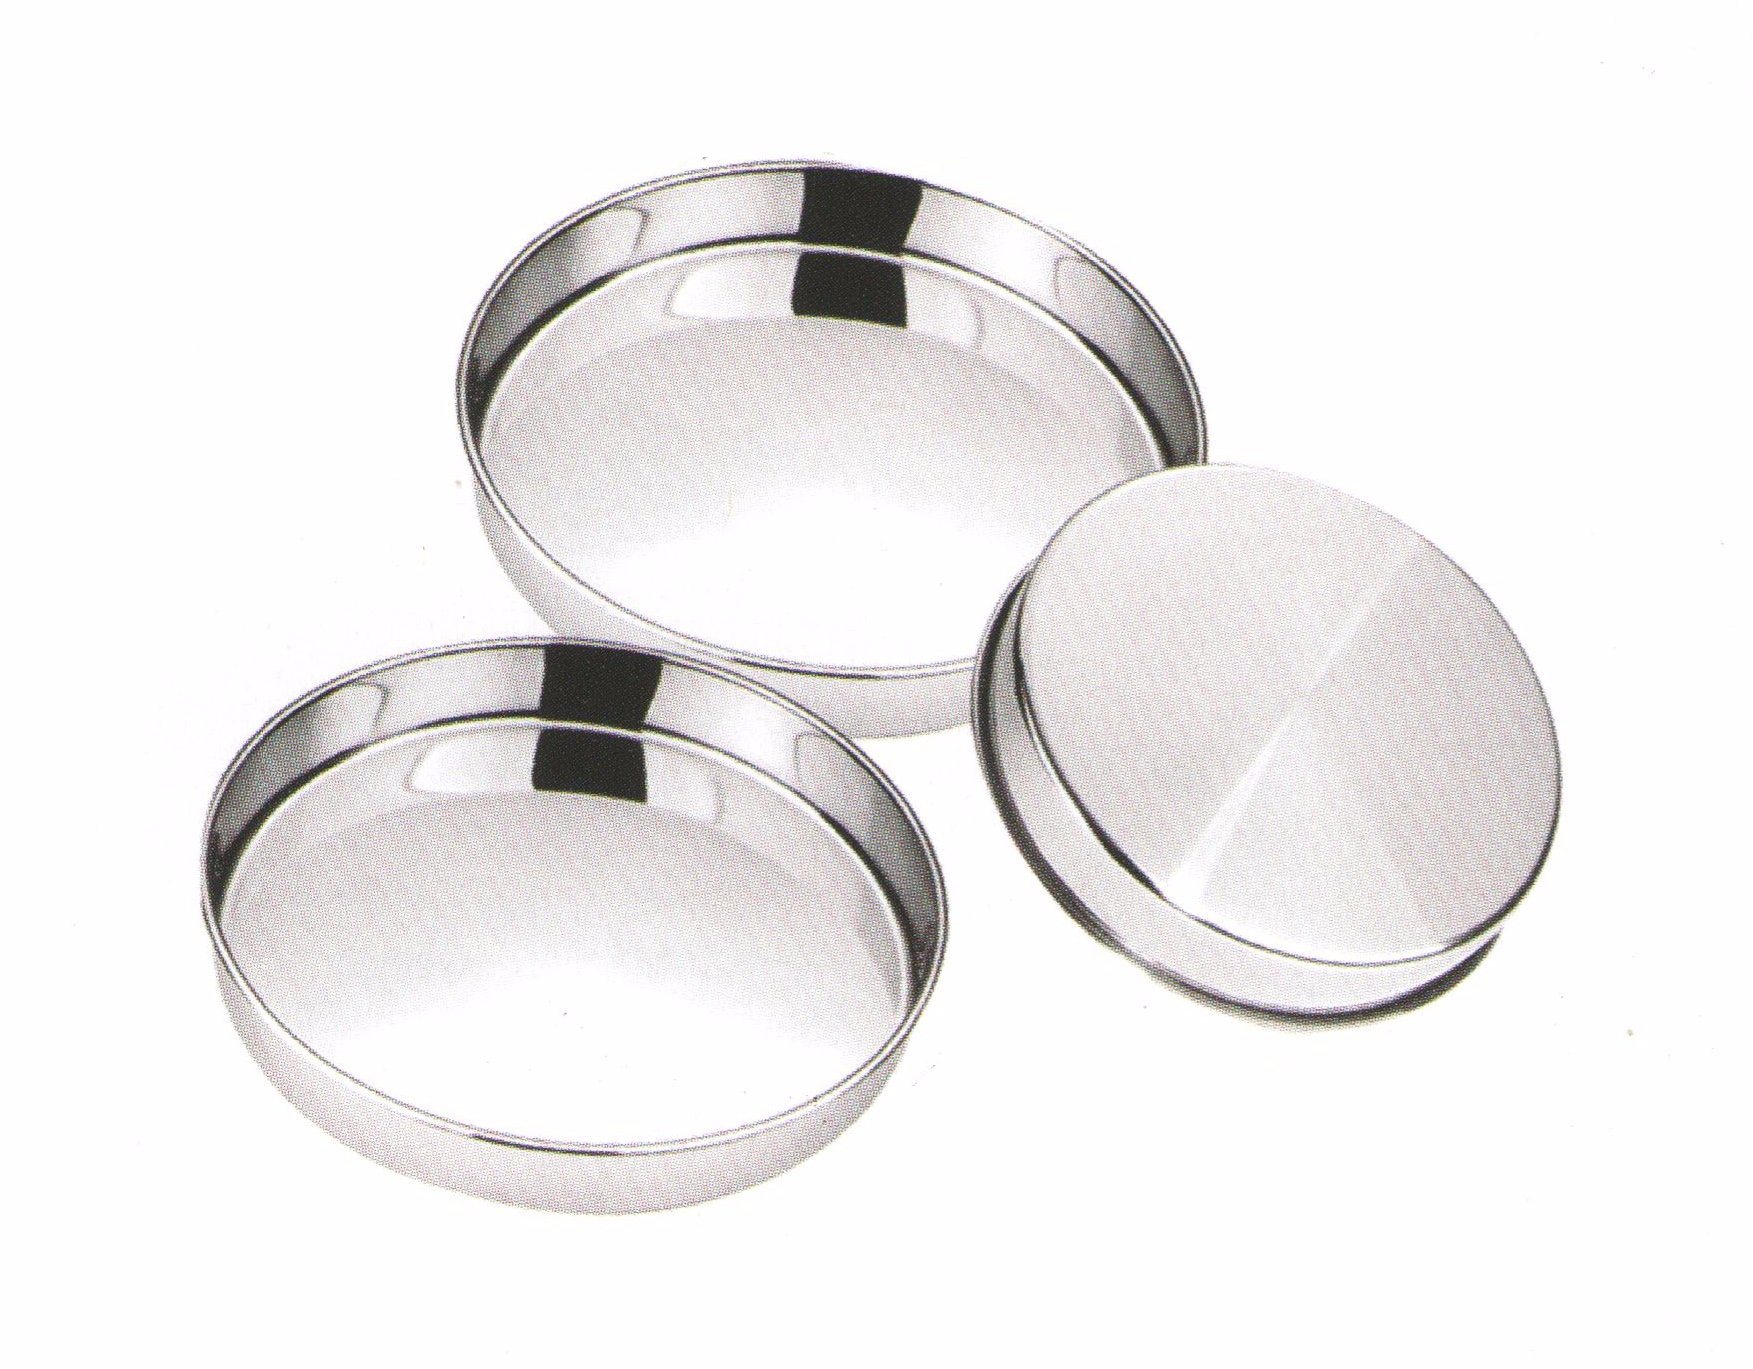 China Manufacturer for Nature Wheat Mug -
 Stainless Steel Kitchenware Oval Tray in Round Design Sp012 – Long Prosper